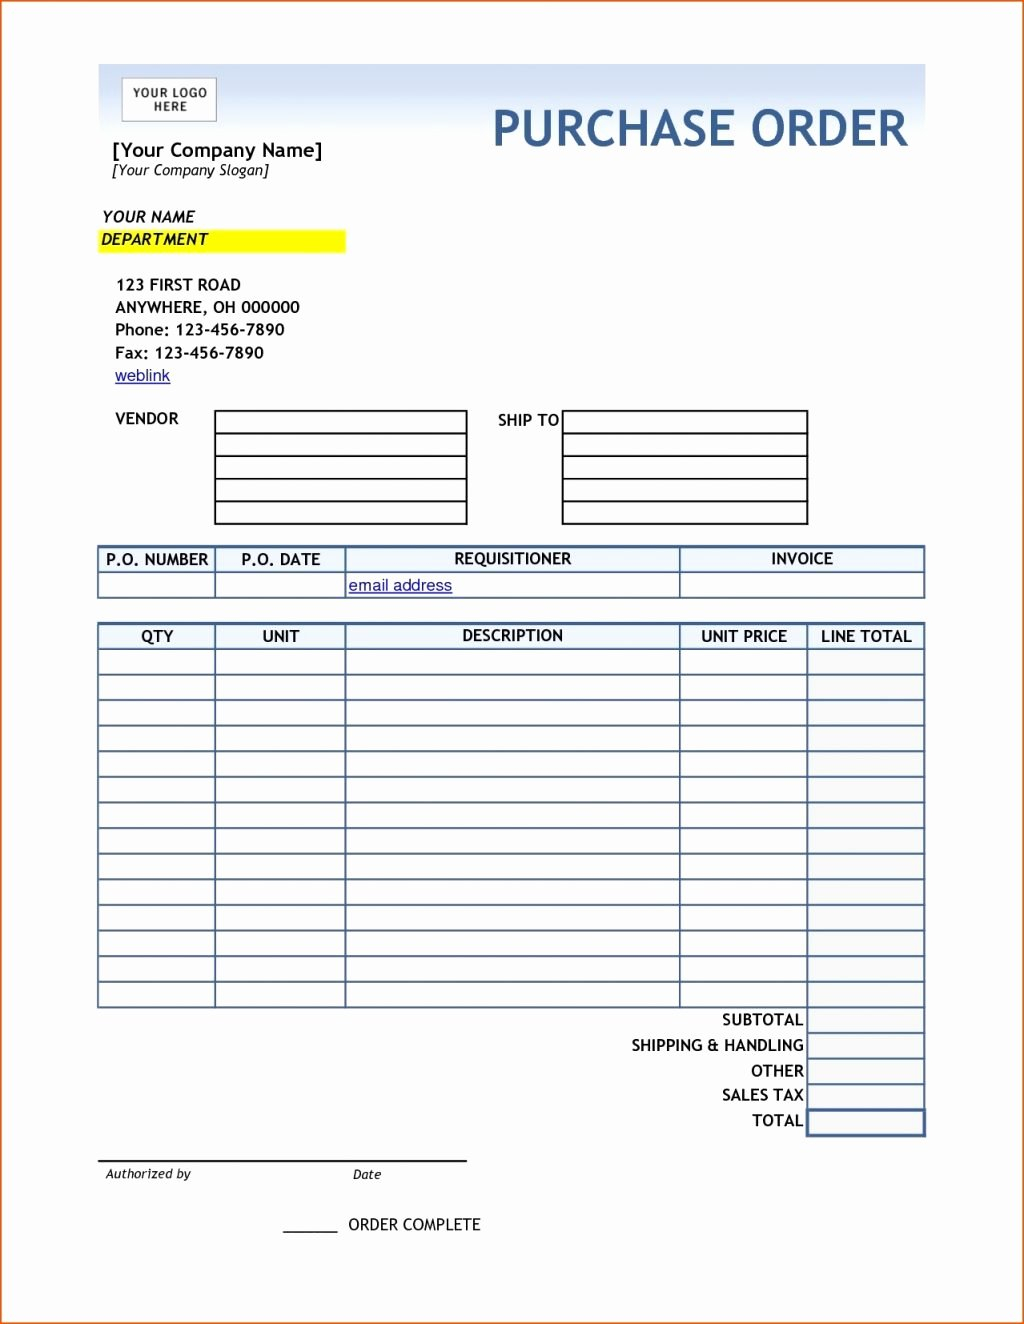 Purchase Order Tracking Spreadsheet Google Spreadshee free purchase